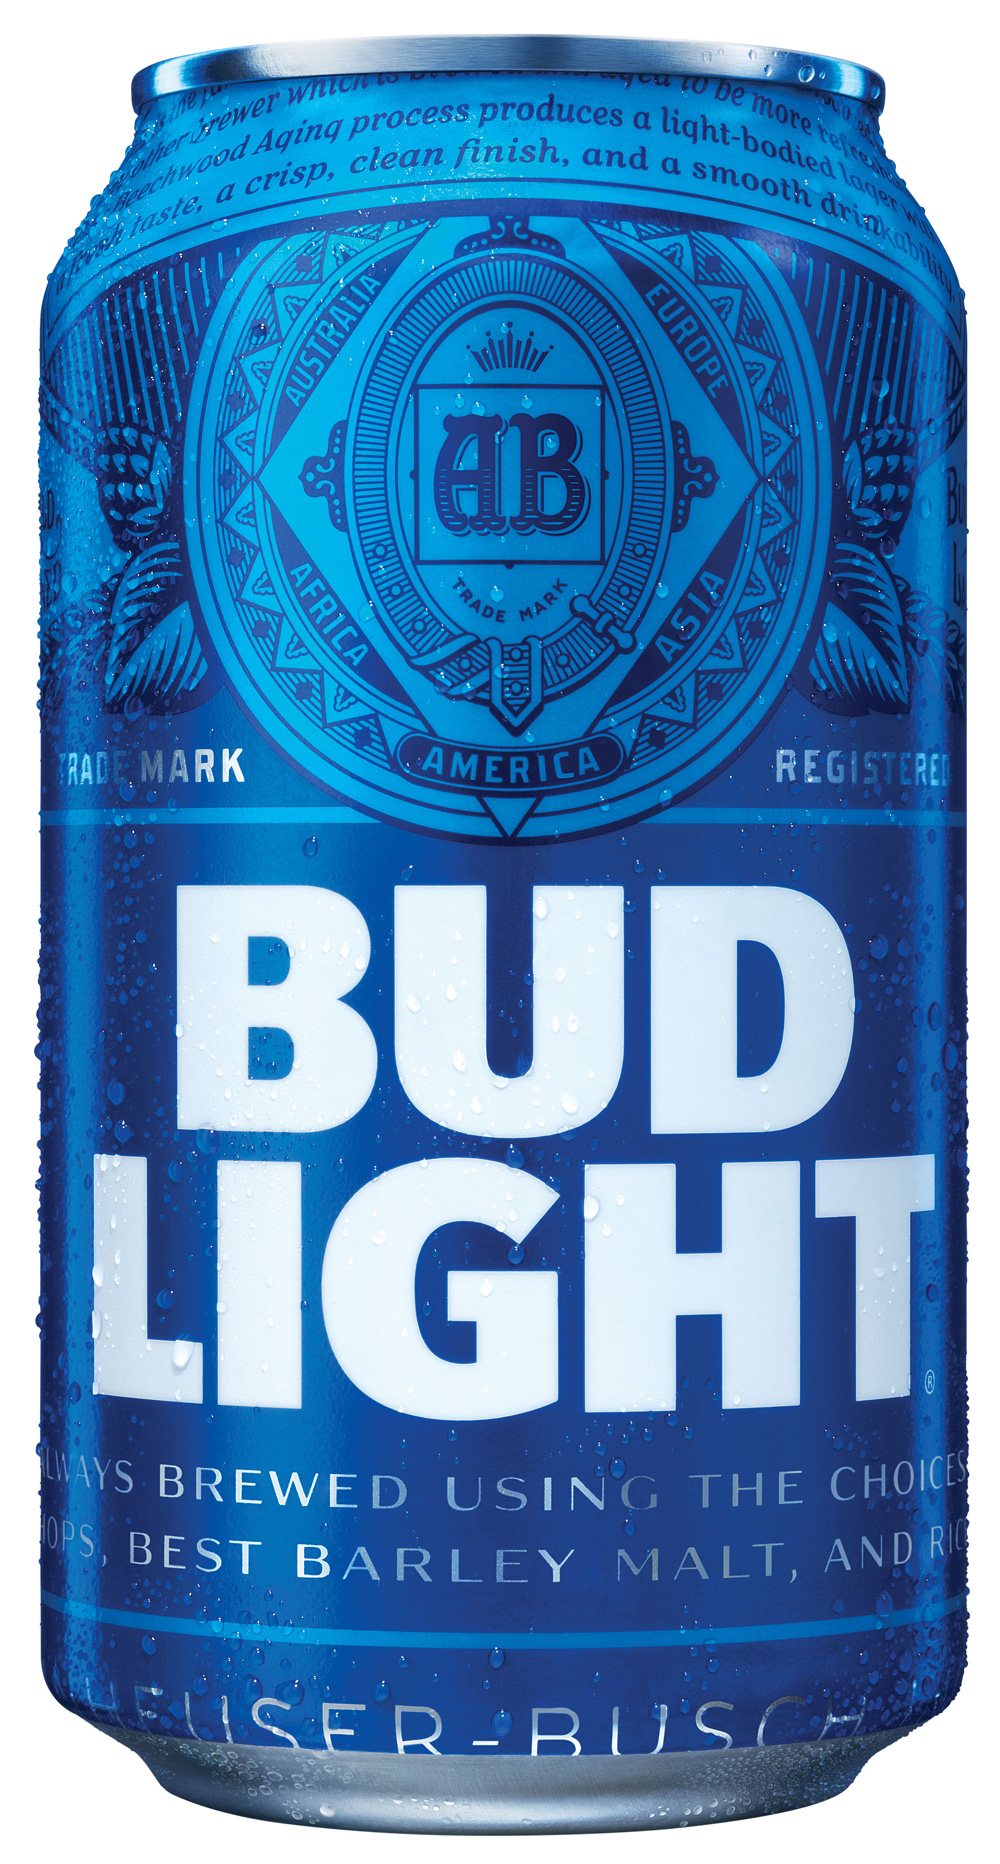 Brand New New Packaging for Bud Light by Jones Knowles Ritchie